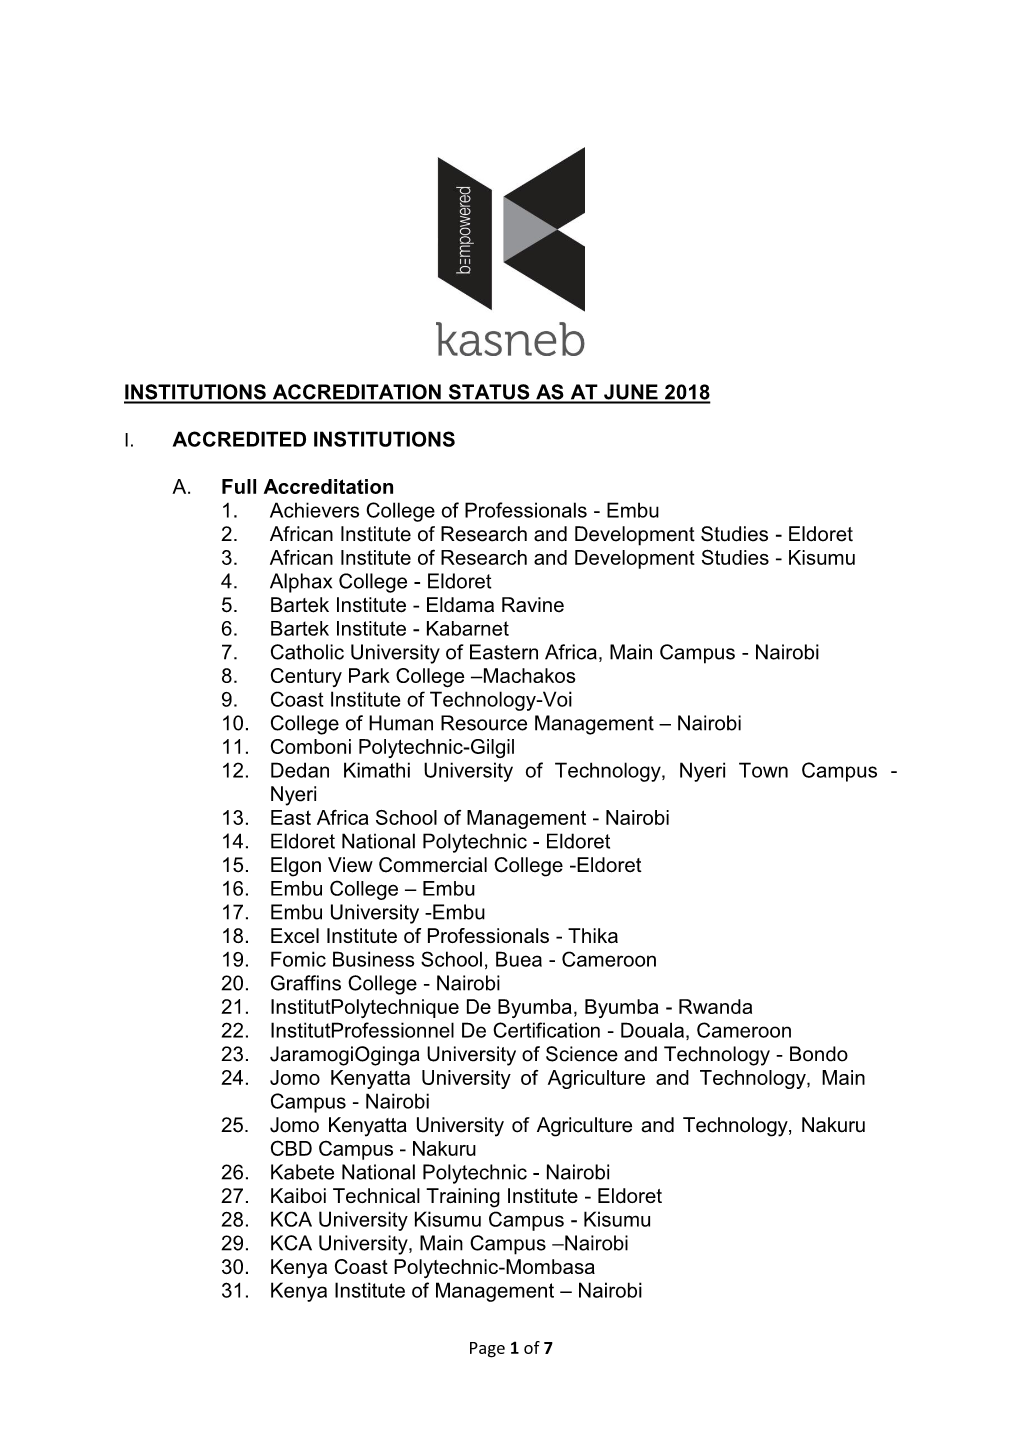 Institutions Accreditation Status As at June 2018